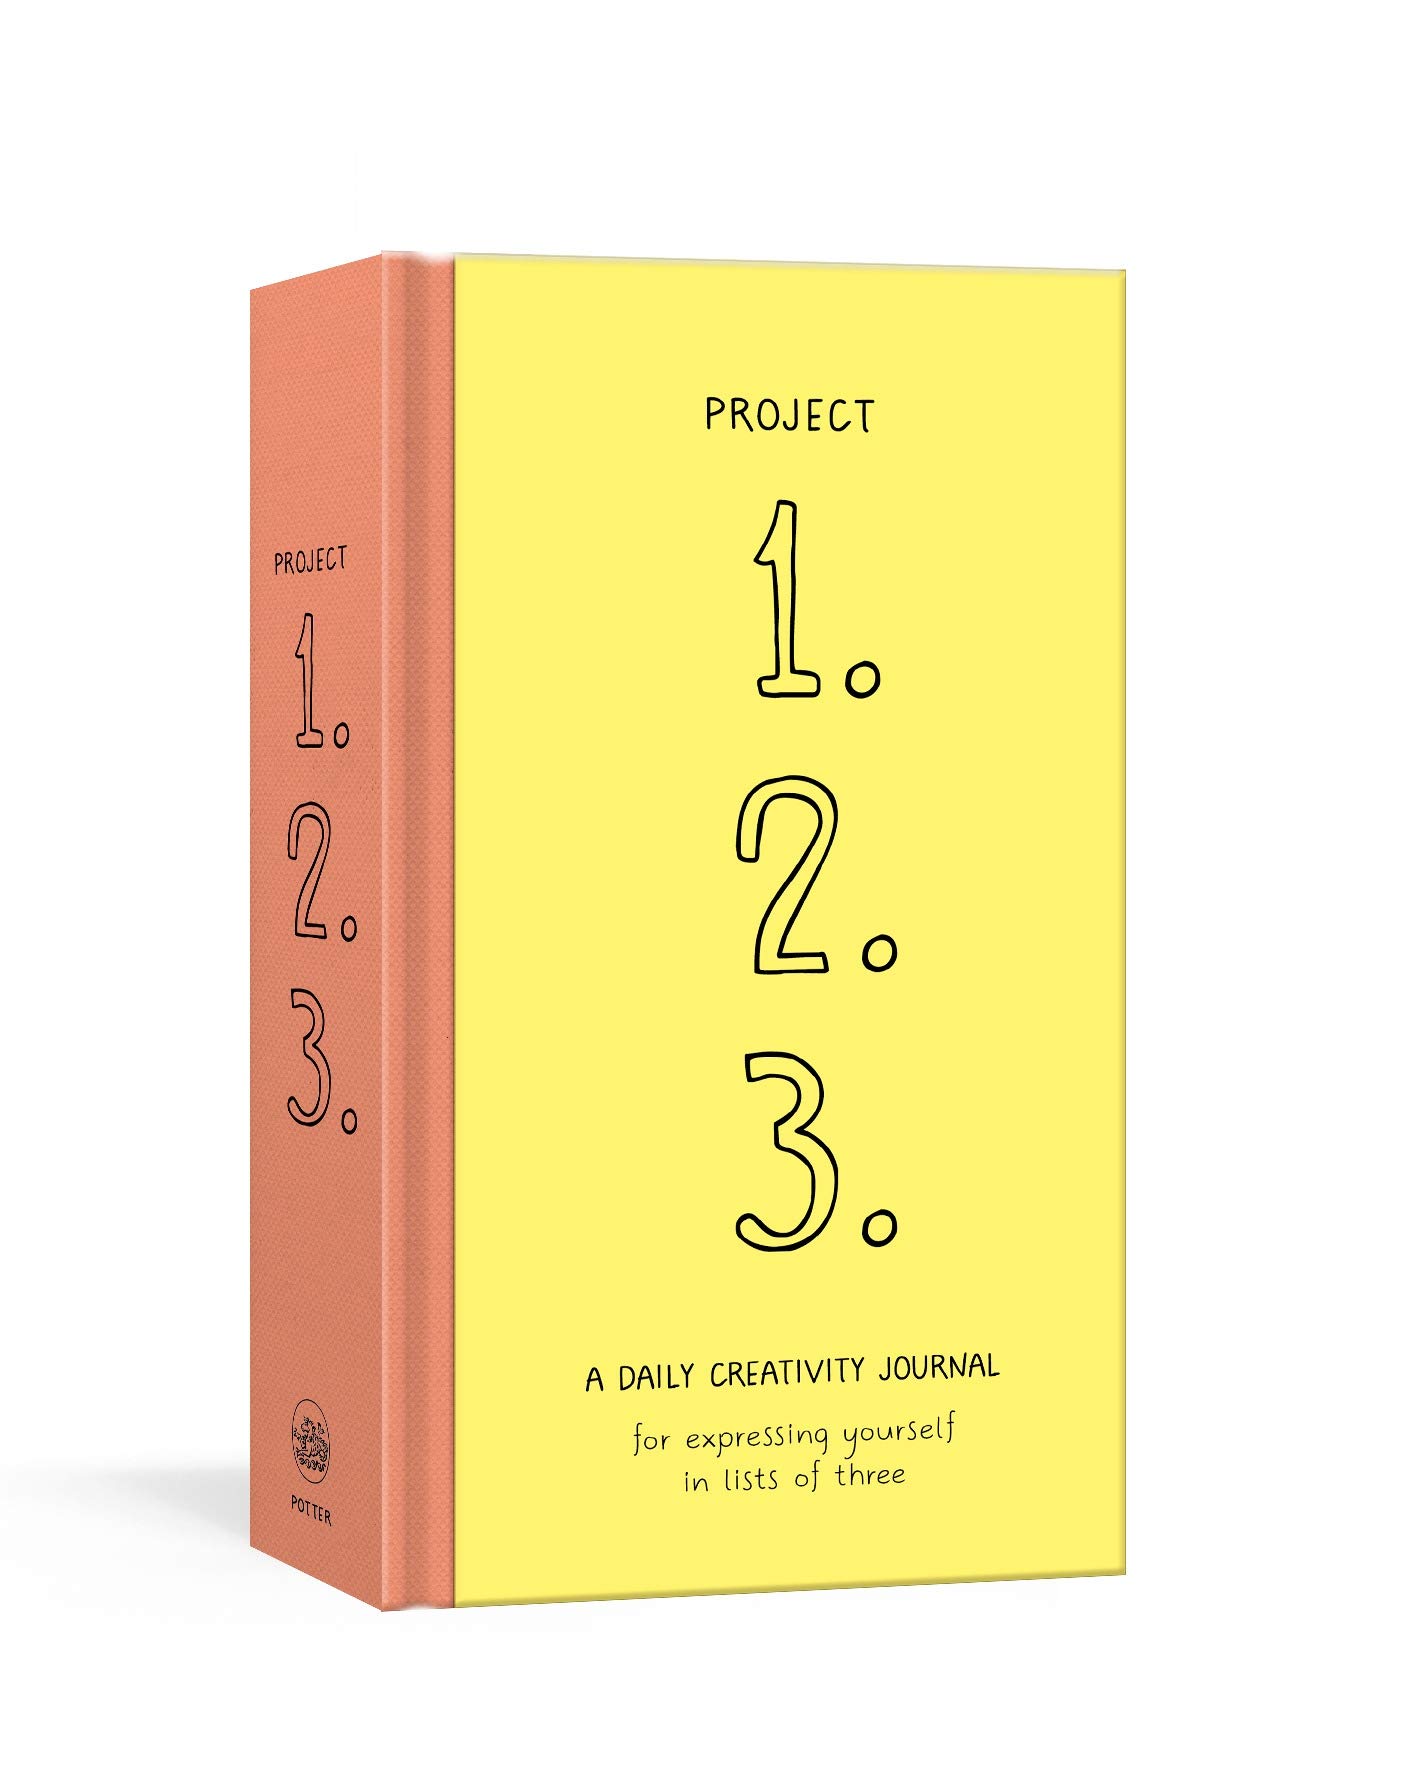 Jurnal Motivational - Project 1, 2, 3: A Daily Creativity Journal for Expressing Yourself in Lists of Three | Random House